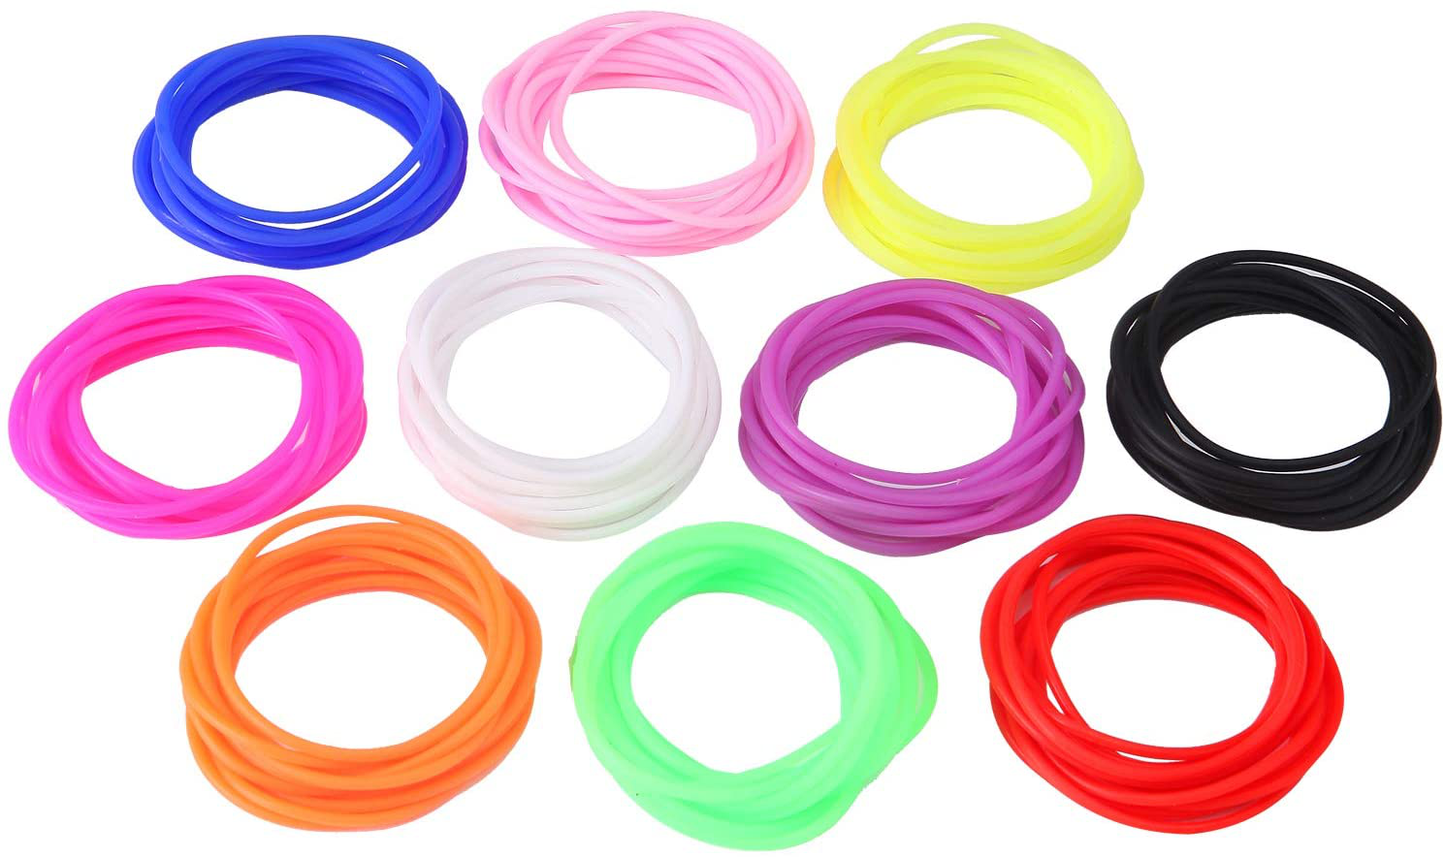 Senkary 120 Pieces Multicolor Silicone Jelly Bracelets Nonluminous Hair Ties for Party, Adults, Women, Girls (10 Colors)